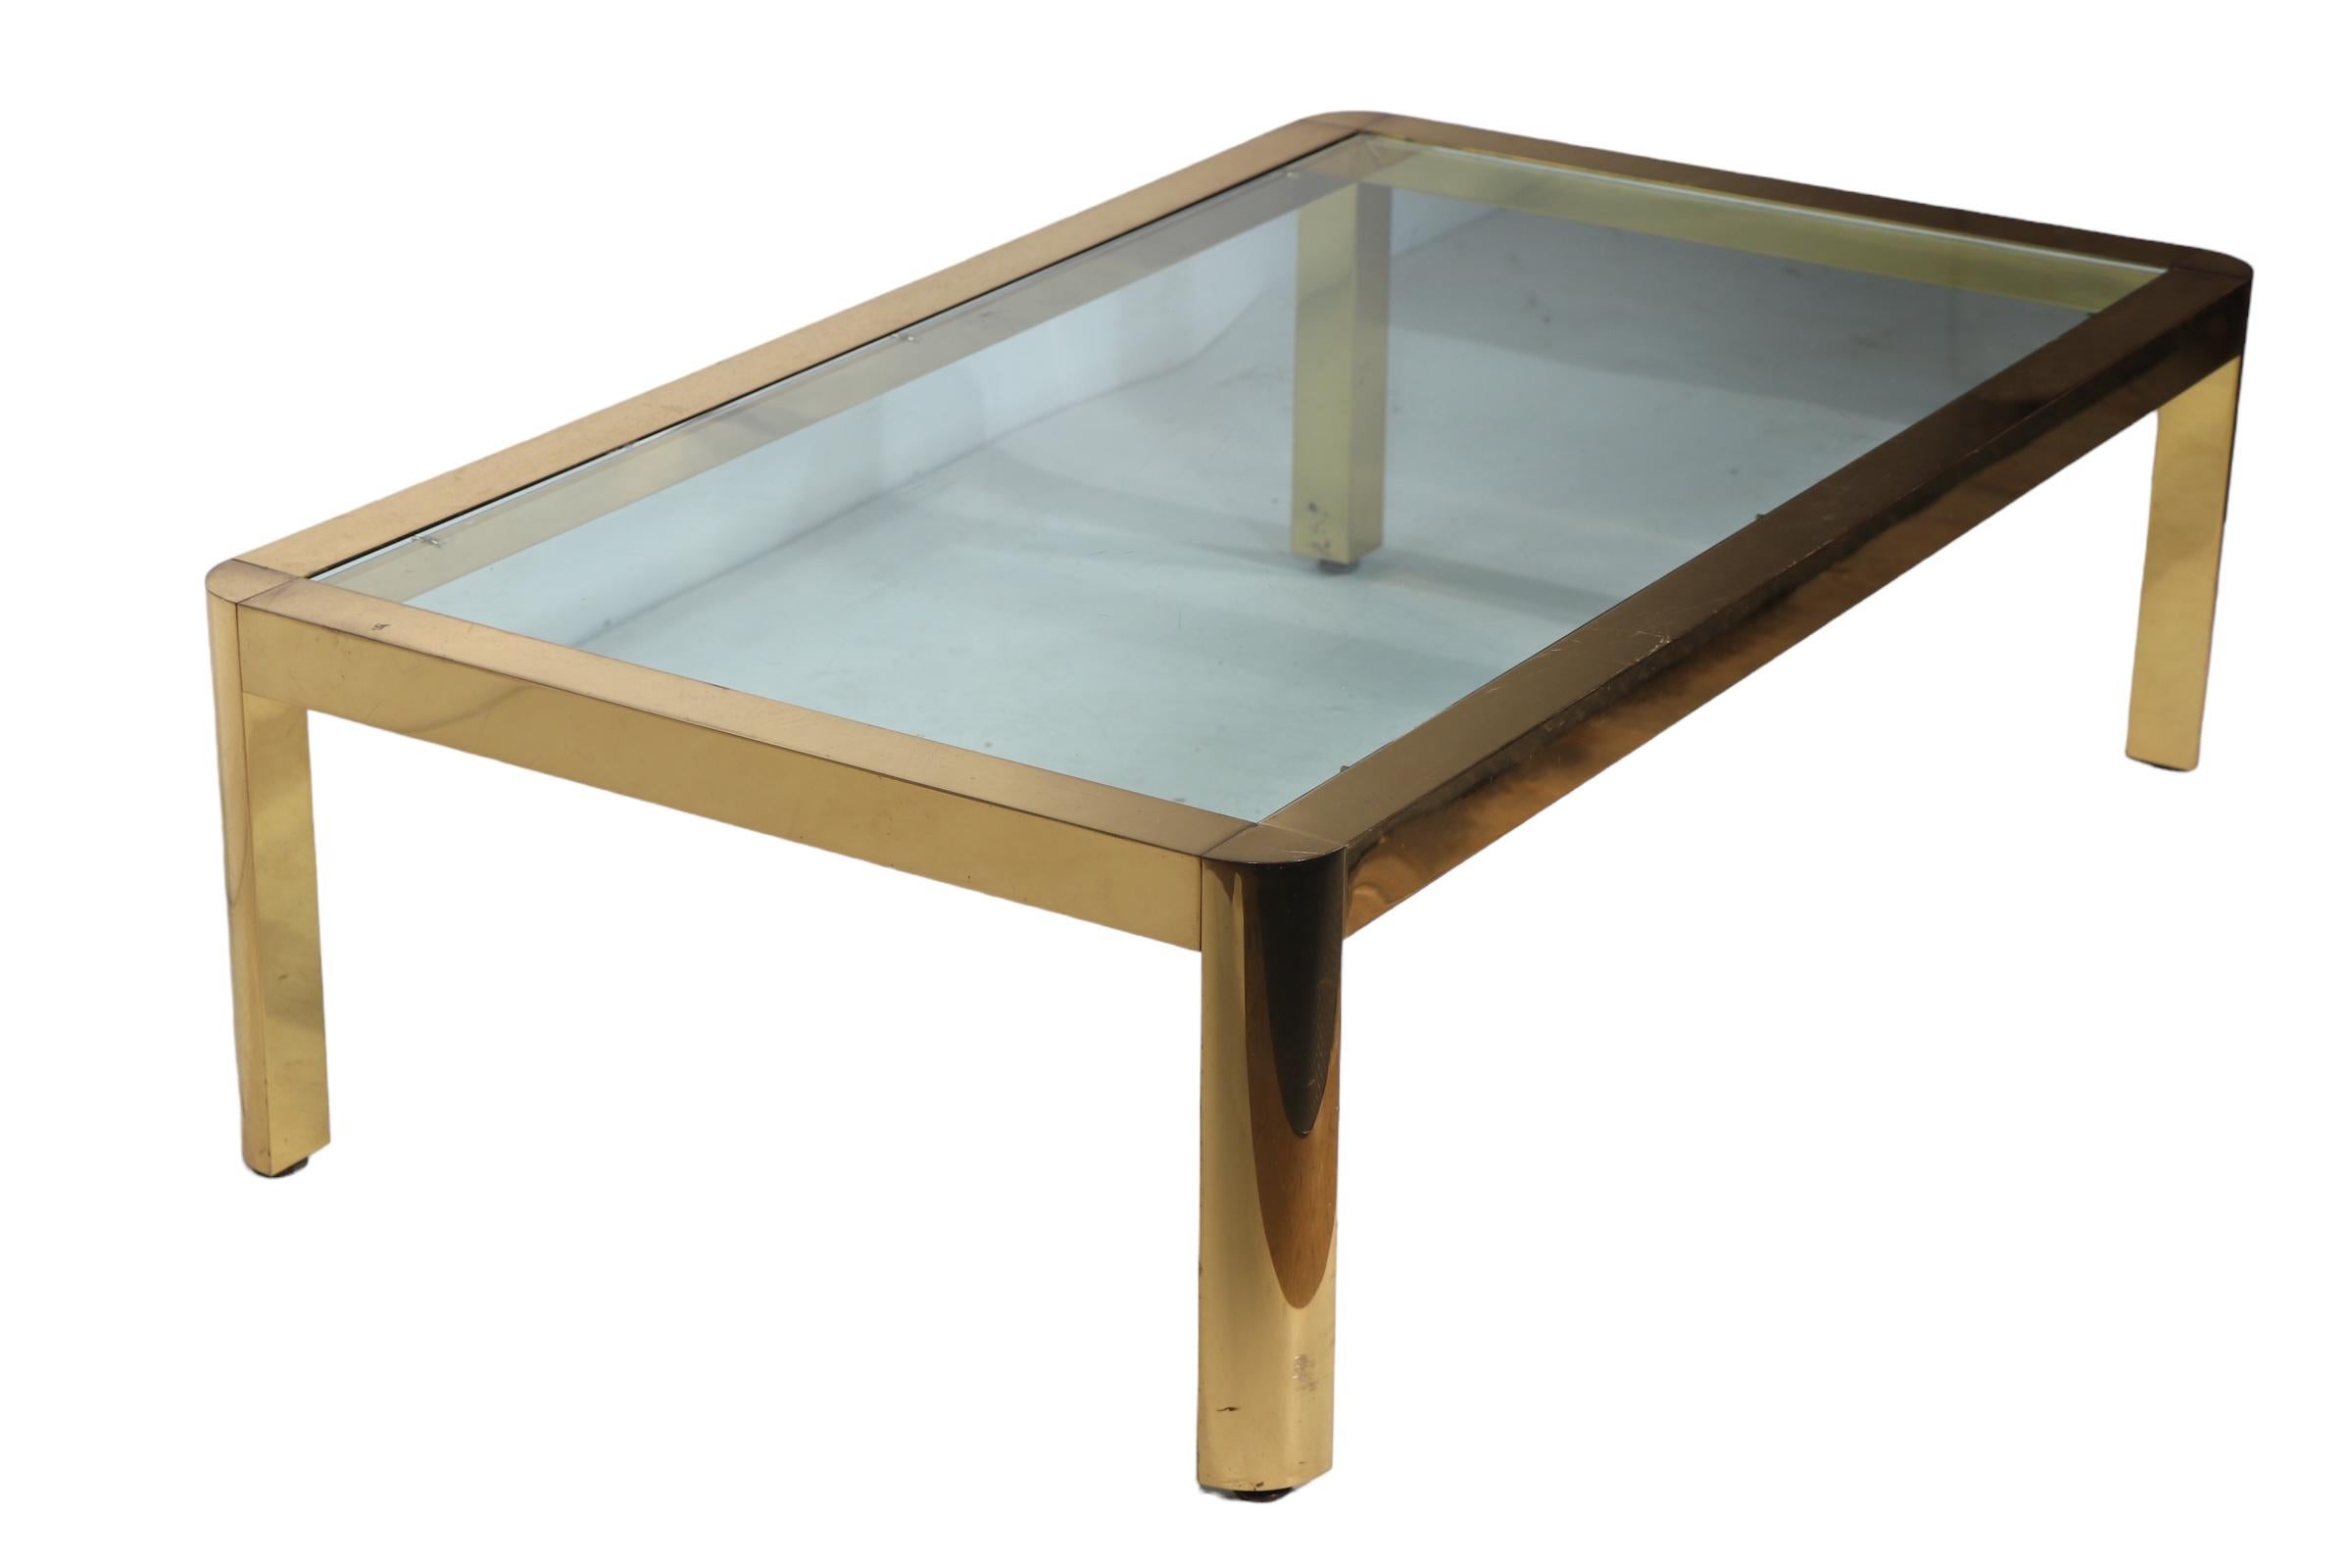 Postmodern Hollywood Regency Brass and Glass Coffee Table Made in Italy c 1970's For Sale 8